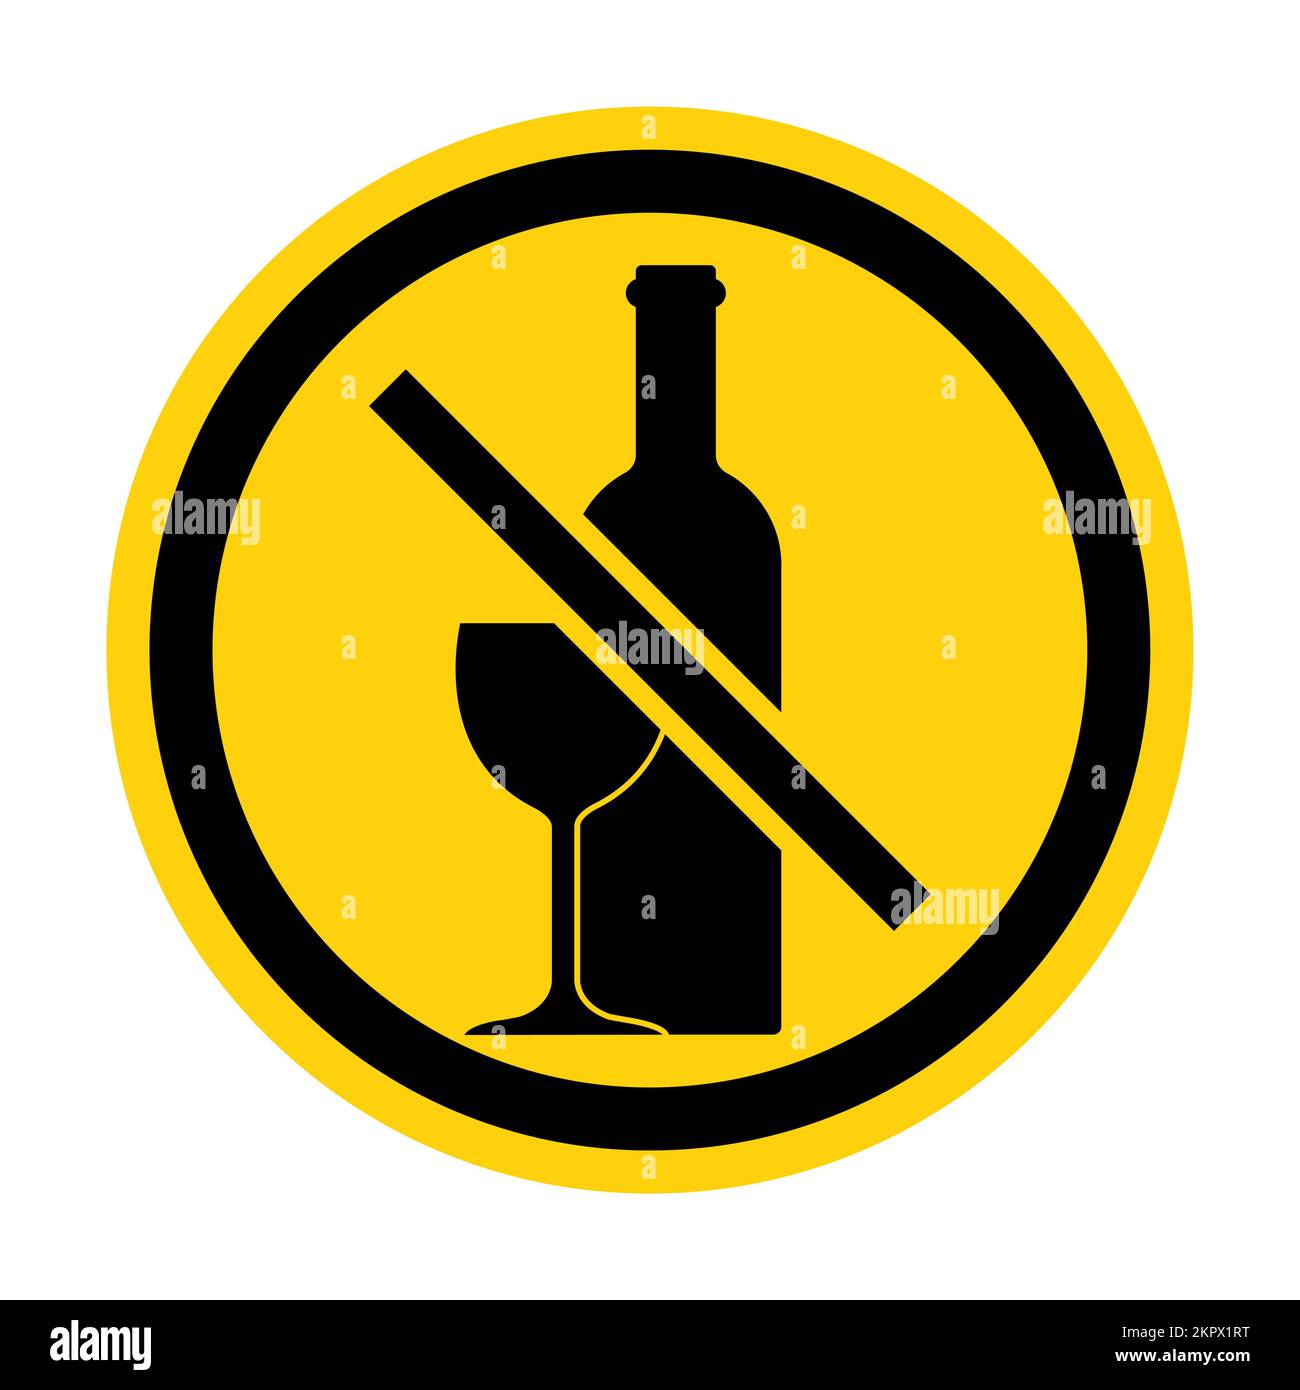 No alcohol Cut Out Stock Images & Pictures - Page 3 - Alamy